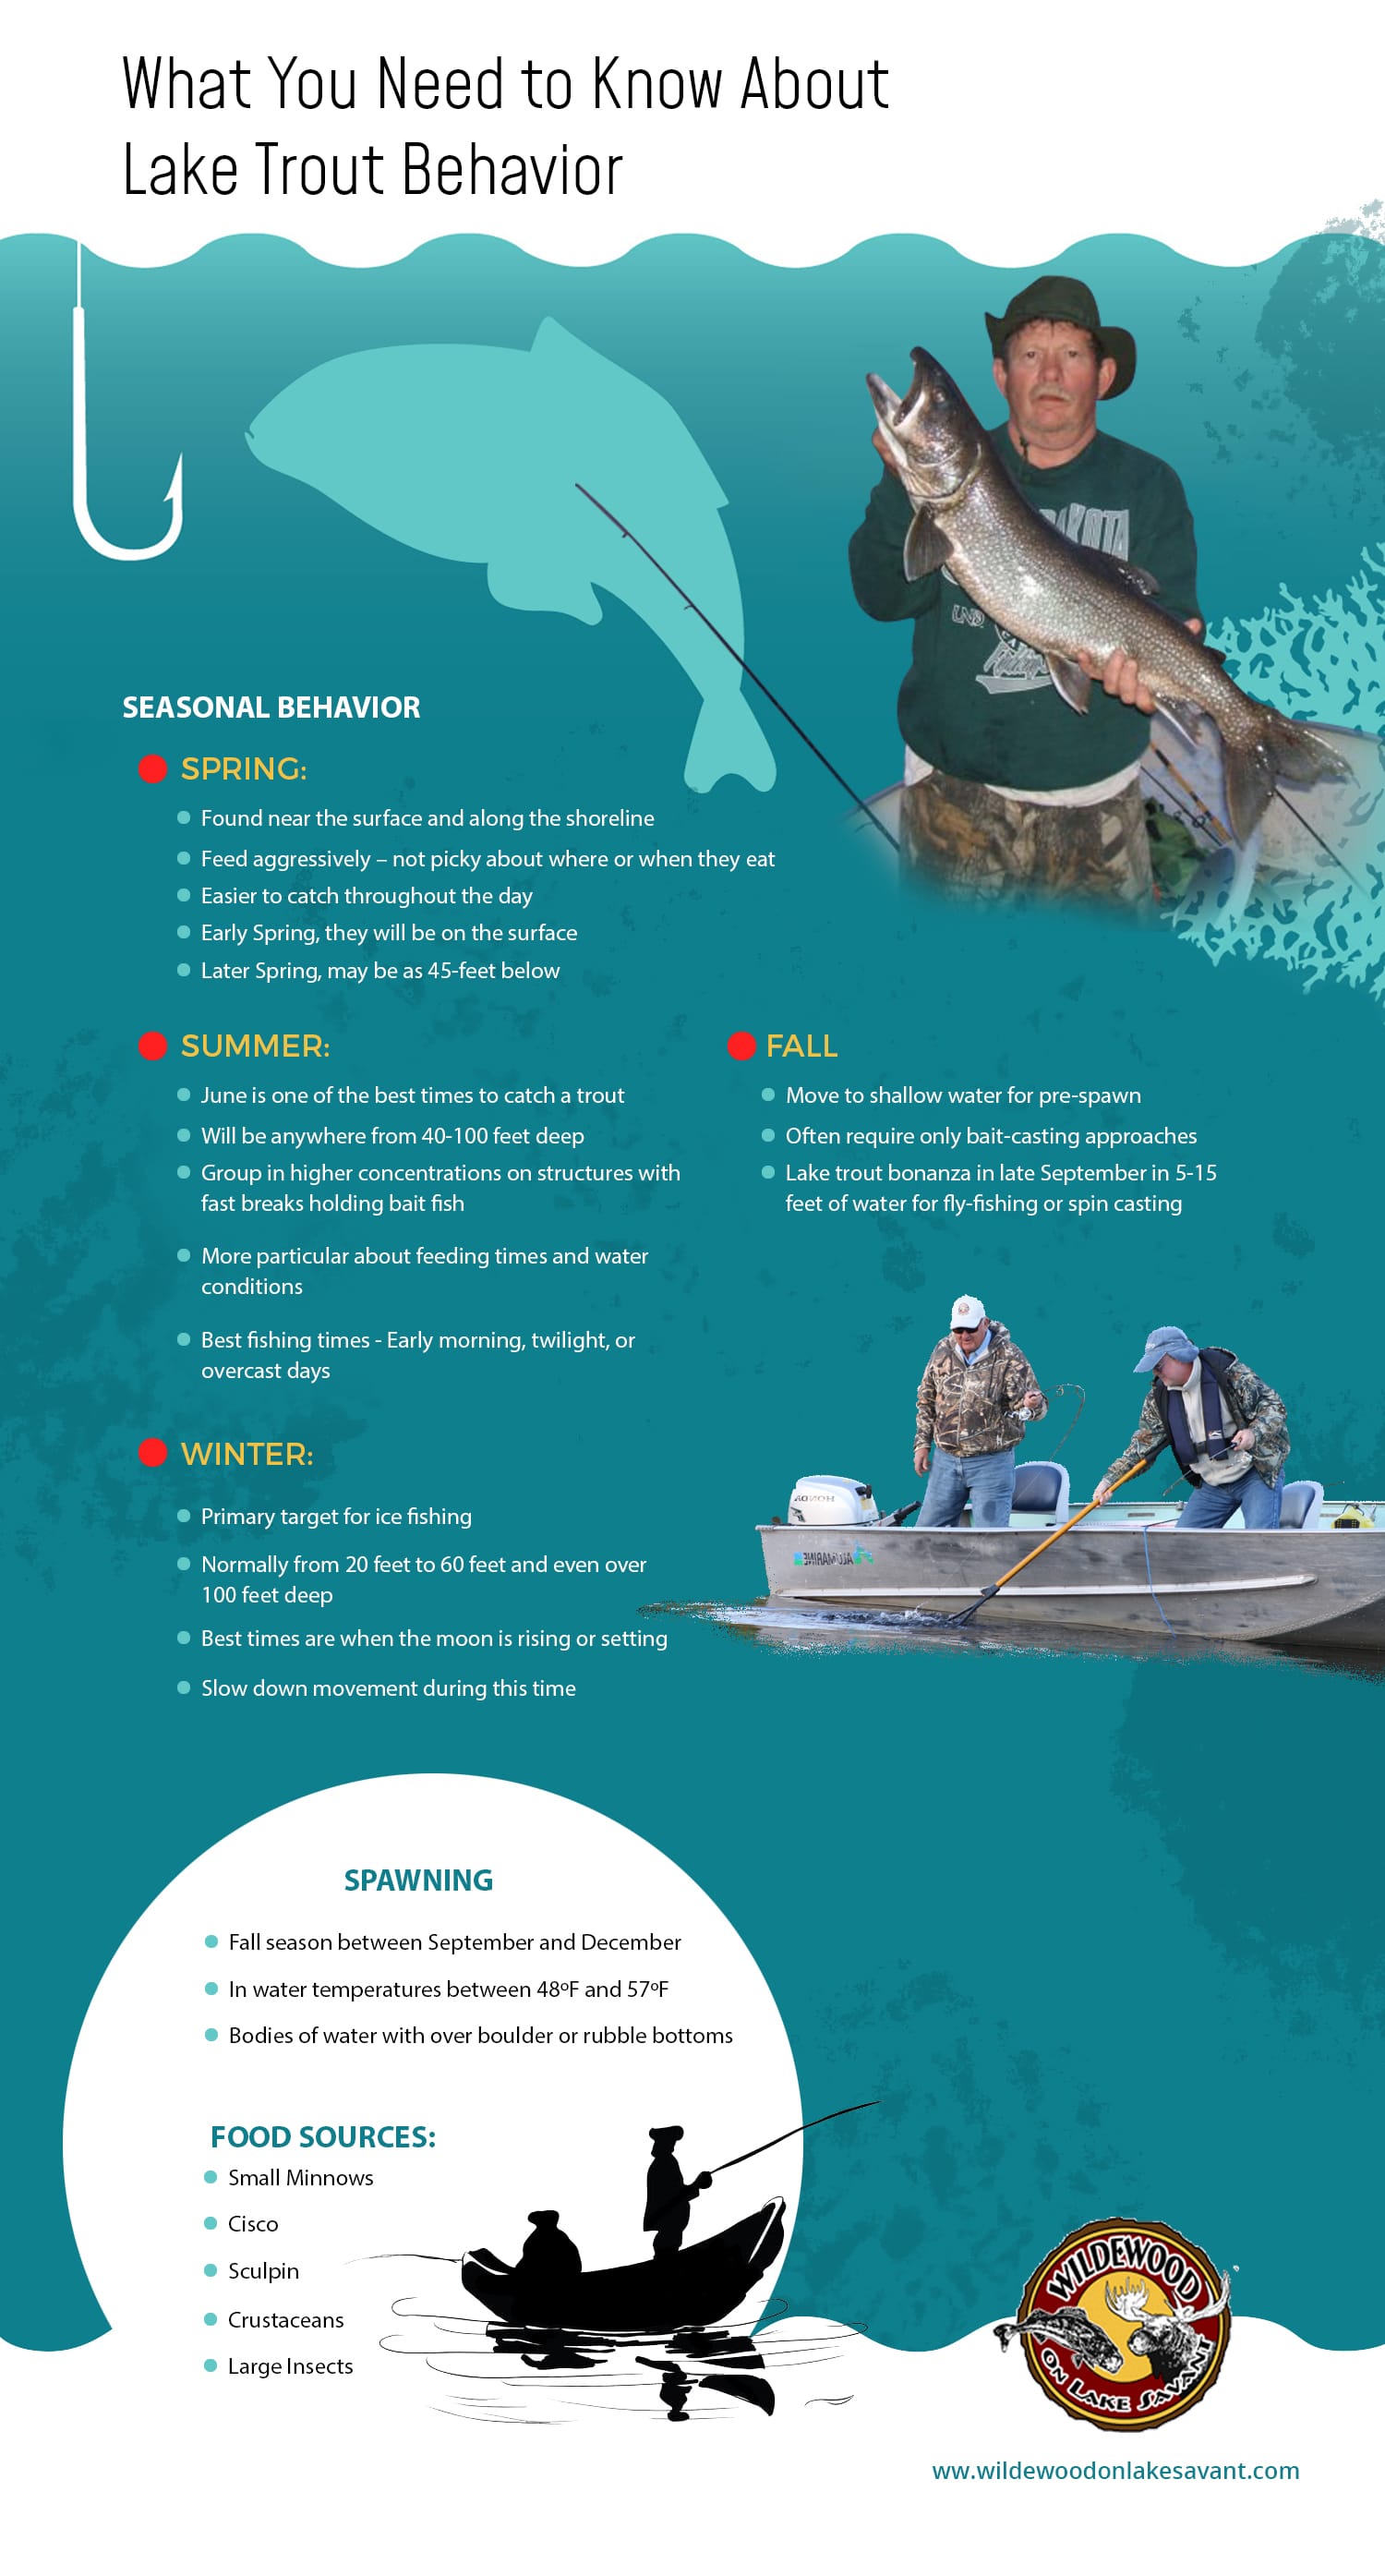 https://wildewoodonlakesavant.com/wp-content/uploads/2019/08/Infographics-Need-to-Know-About-Lake-Trout-Behavior.jpg